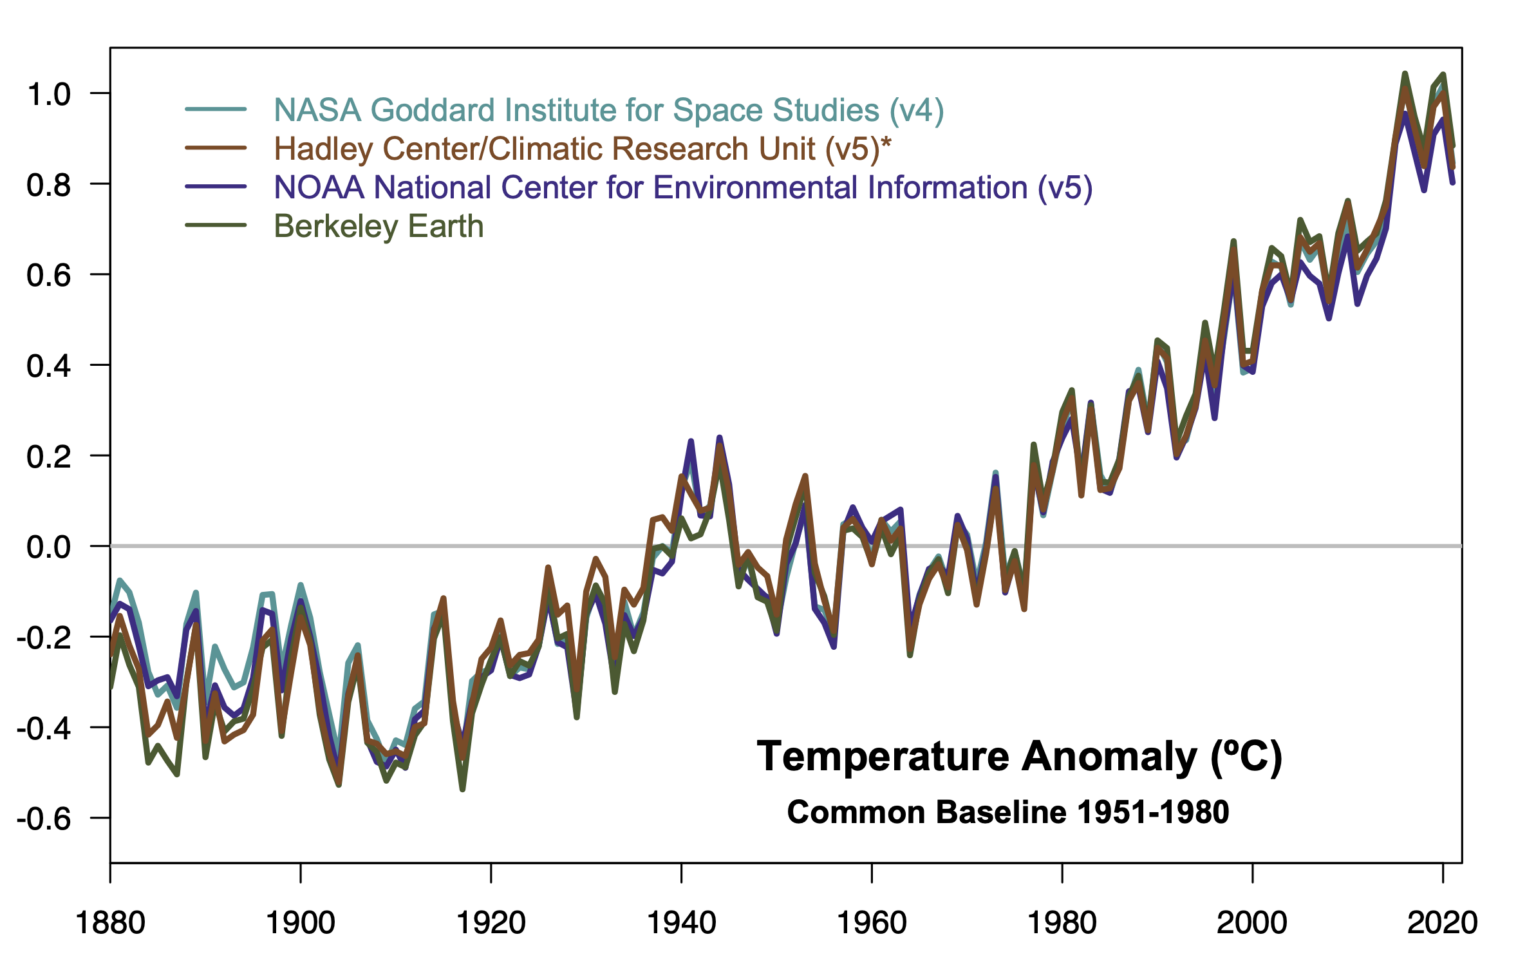 Temperature data show rapid warming over the past few decades, with the most recent data going through 2021.